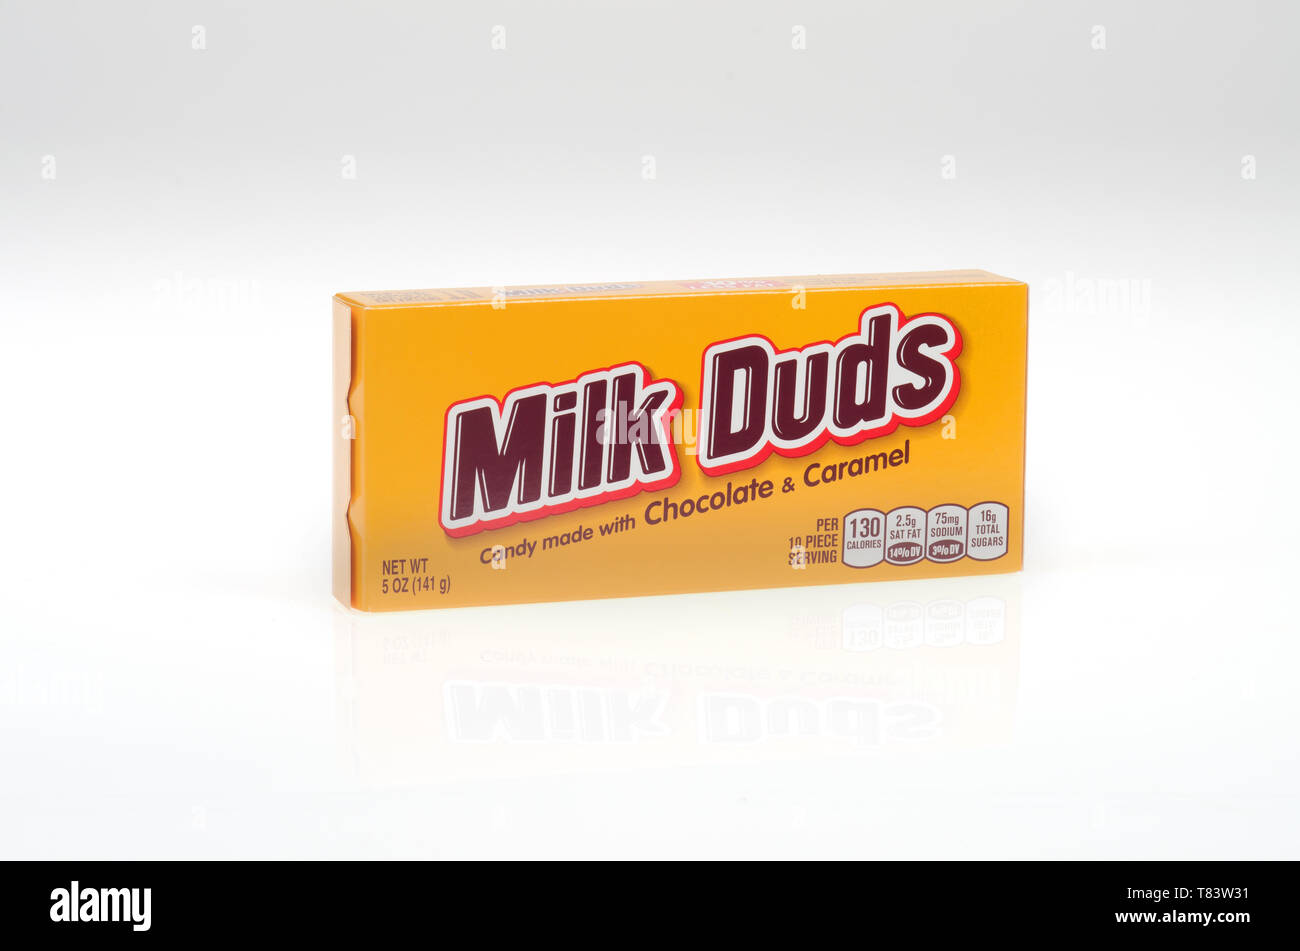 box of Milk Duds chocolate & caramel candy by The Hershey Company Stock Photo